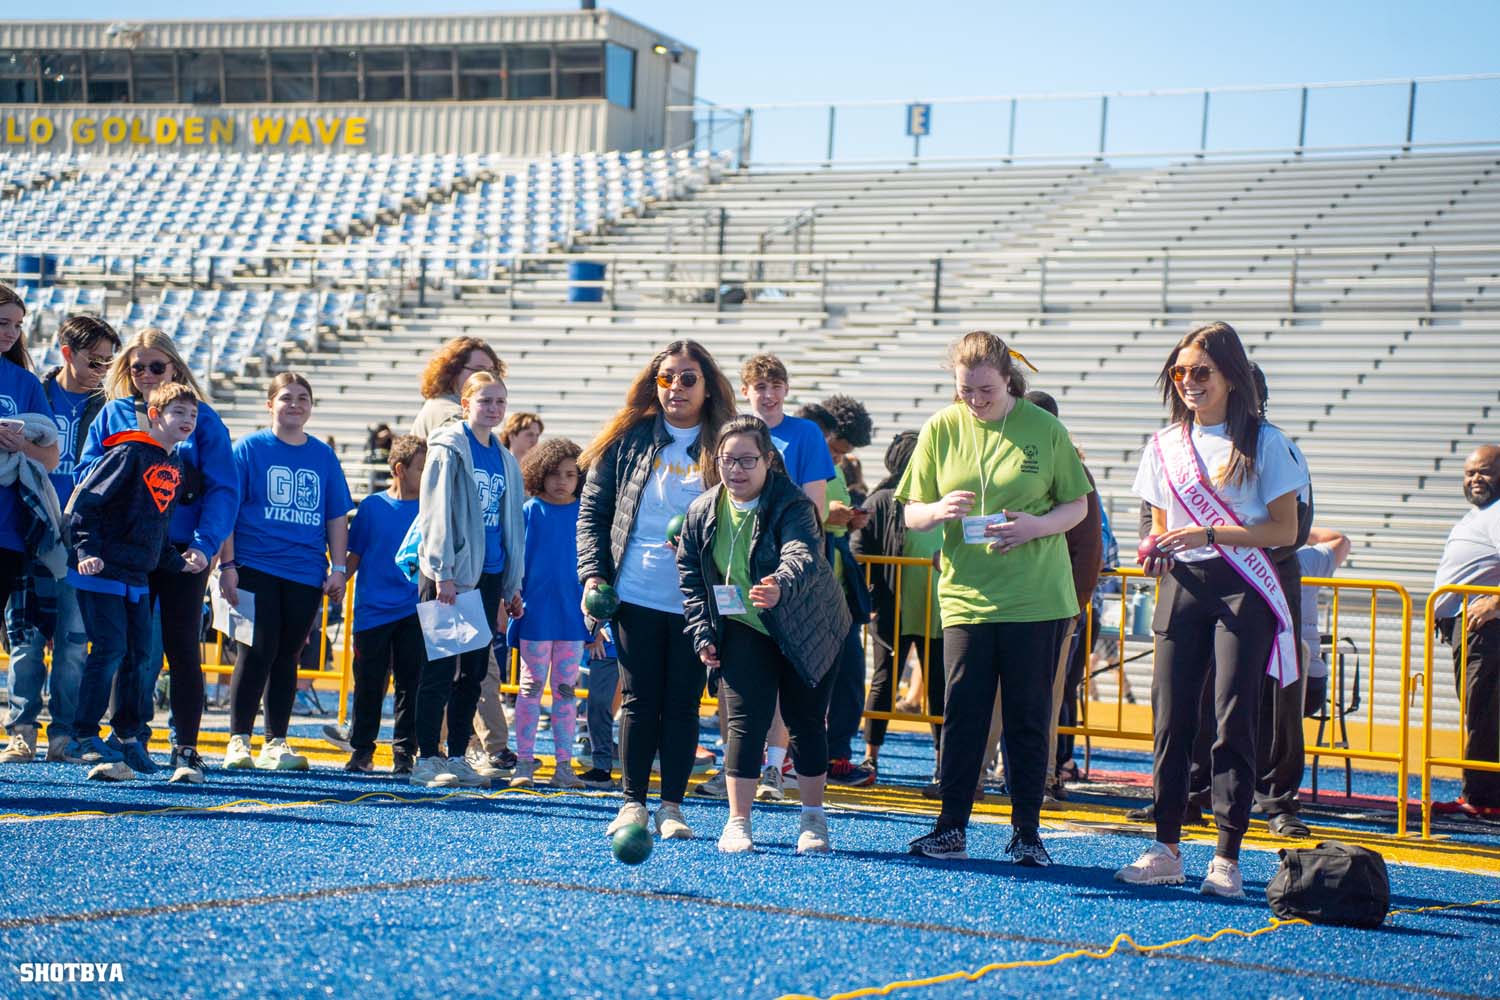 Area+11+Special+Olympics+was+hosted+at+Tupelo+High+School